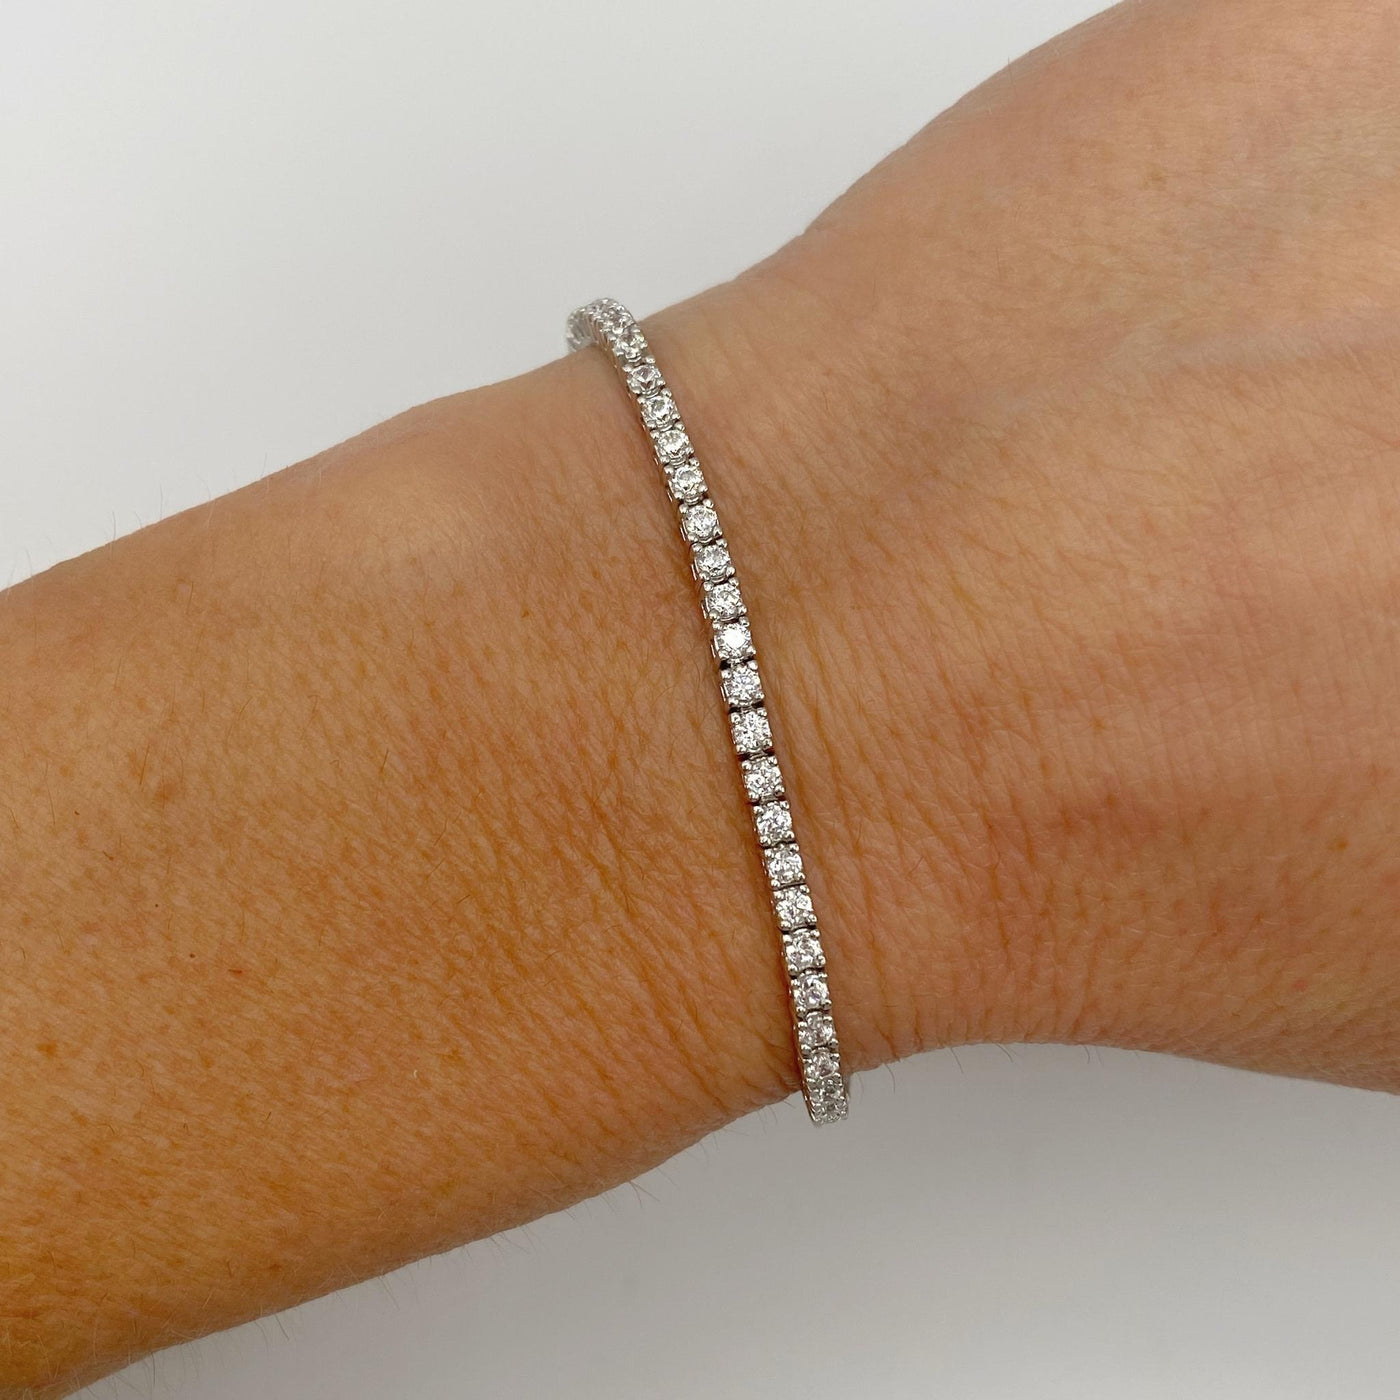 Silver casting tennis bracelet with white round stones - 2 mm